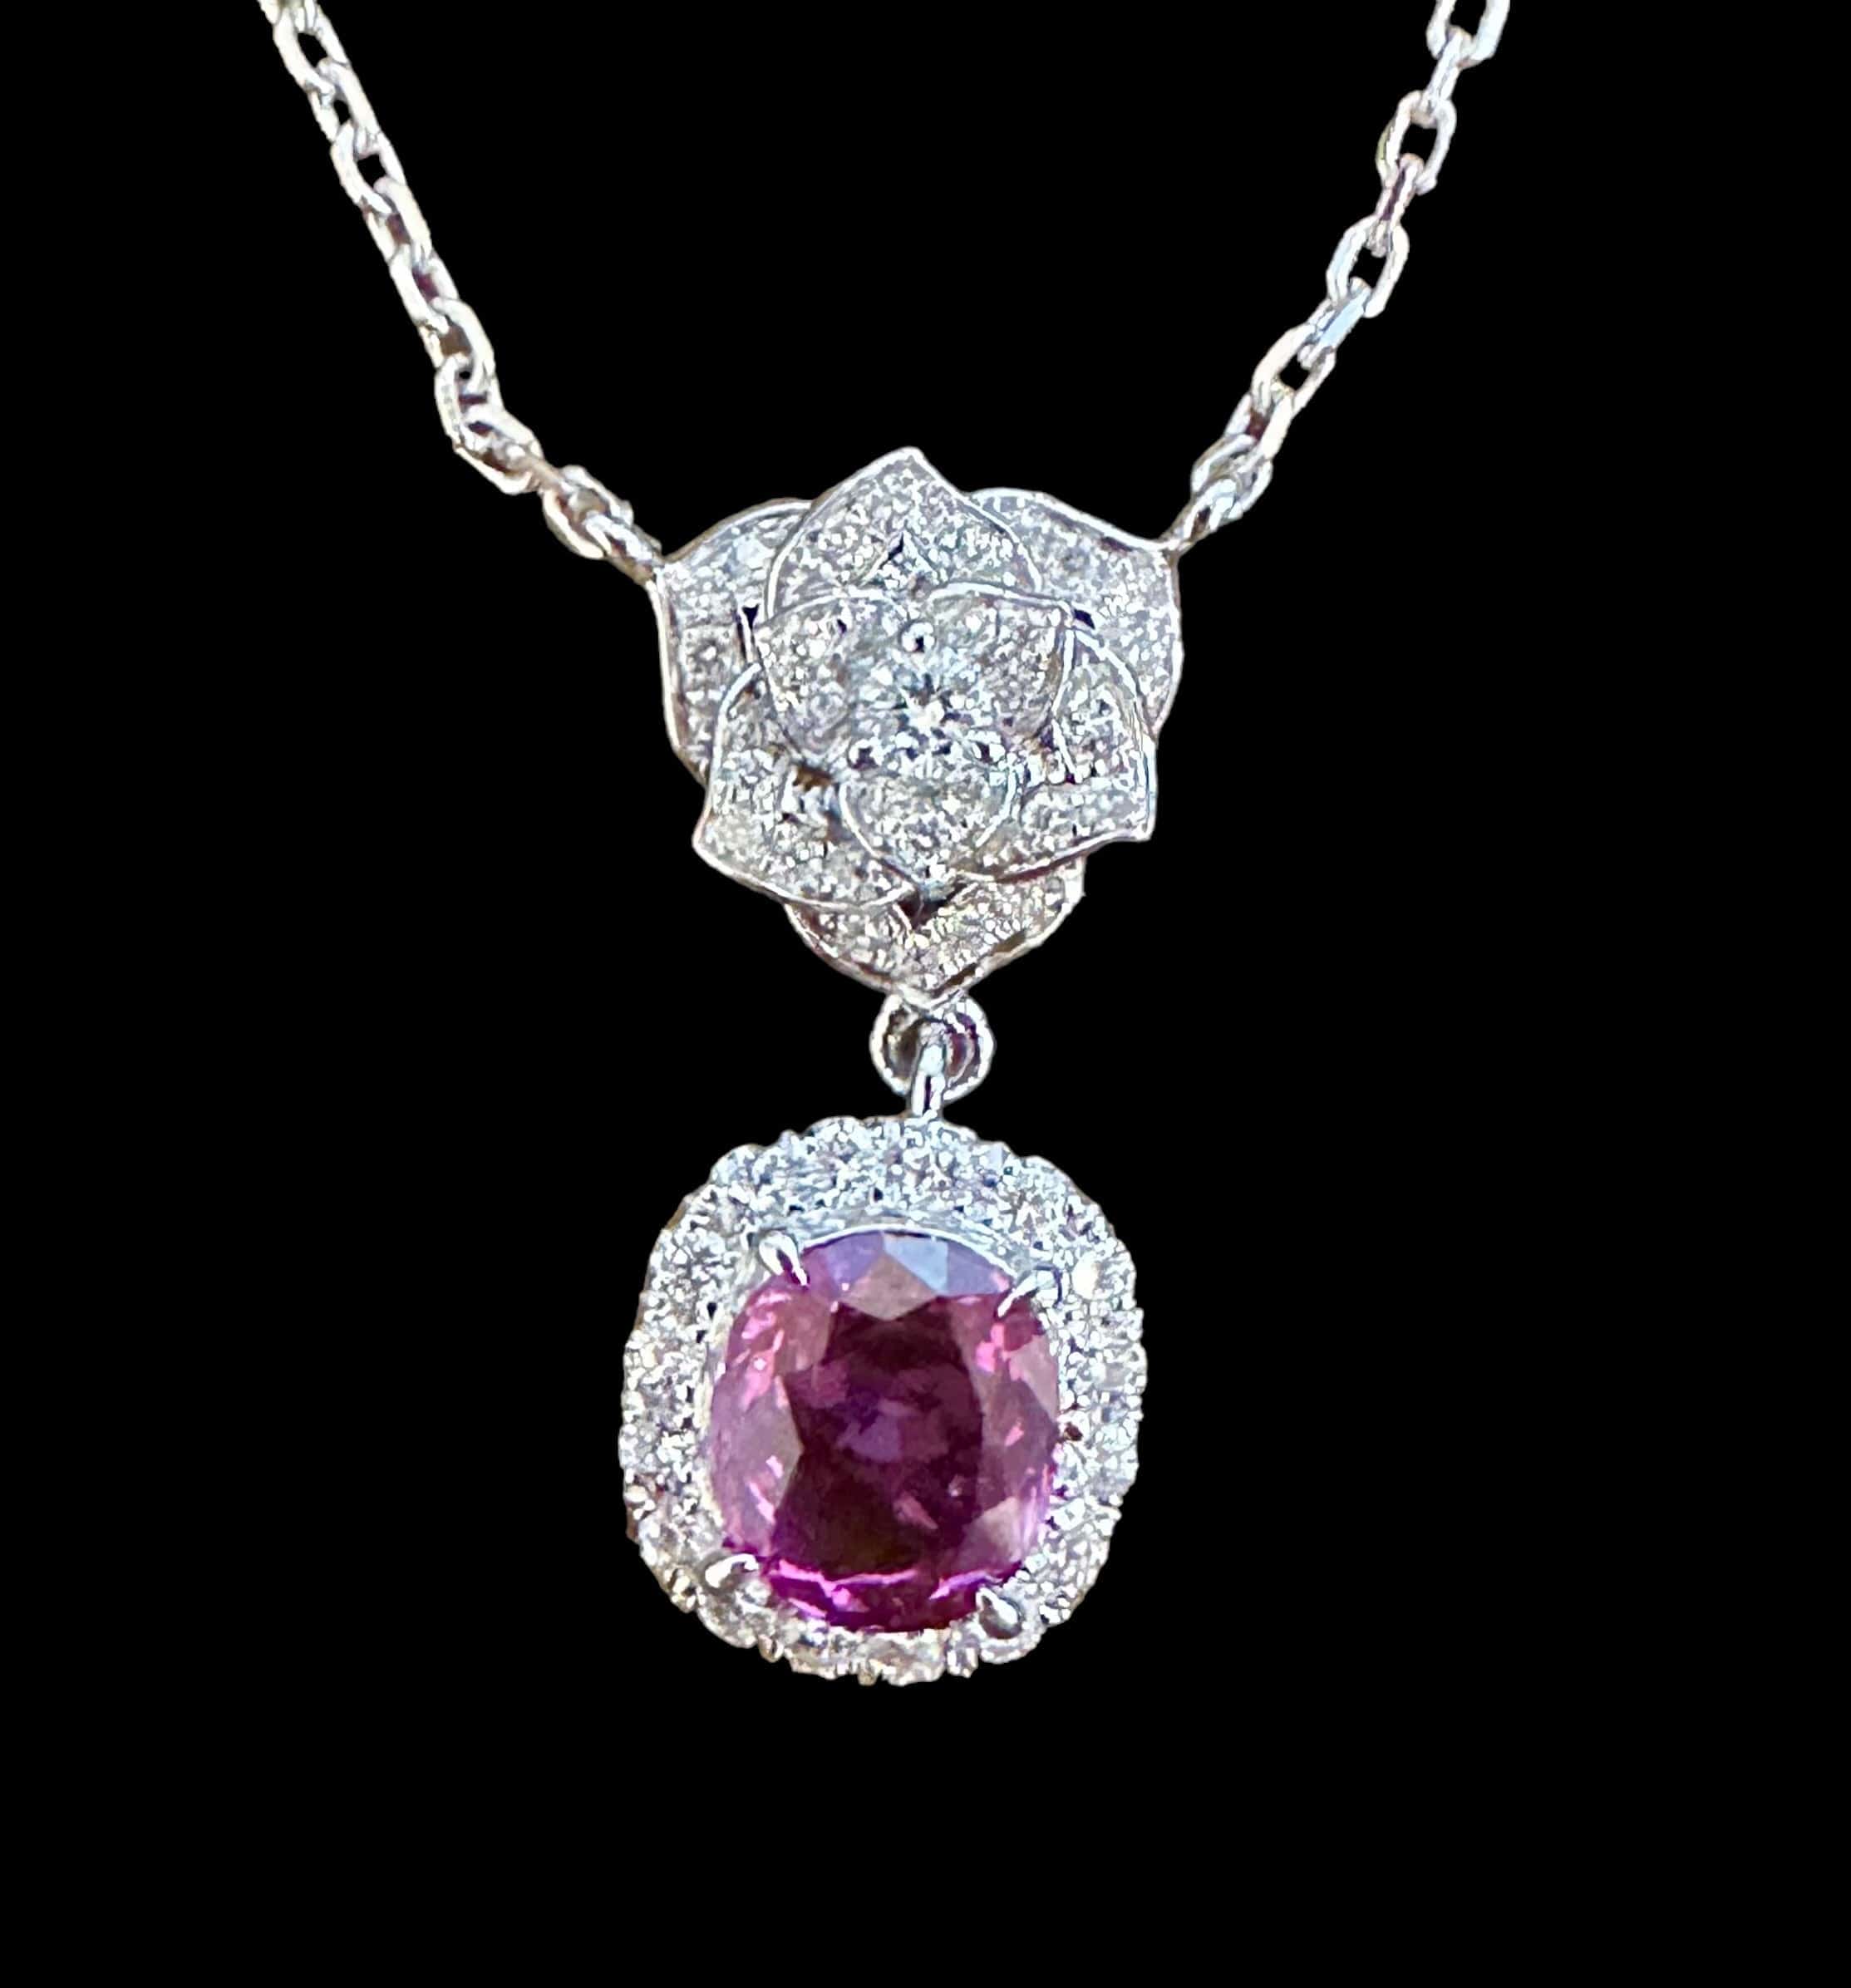 Oval Pink Sapphire Set in a Halo setting with all Diamond Flower Pendant Necklace